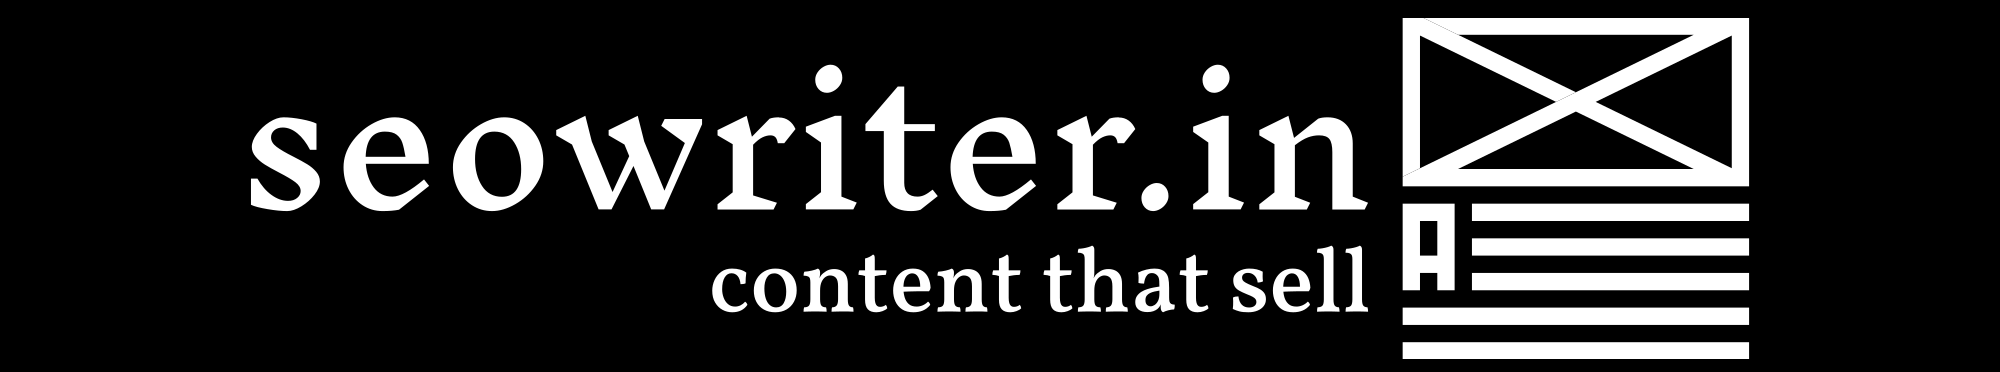 seowriter.in